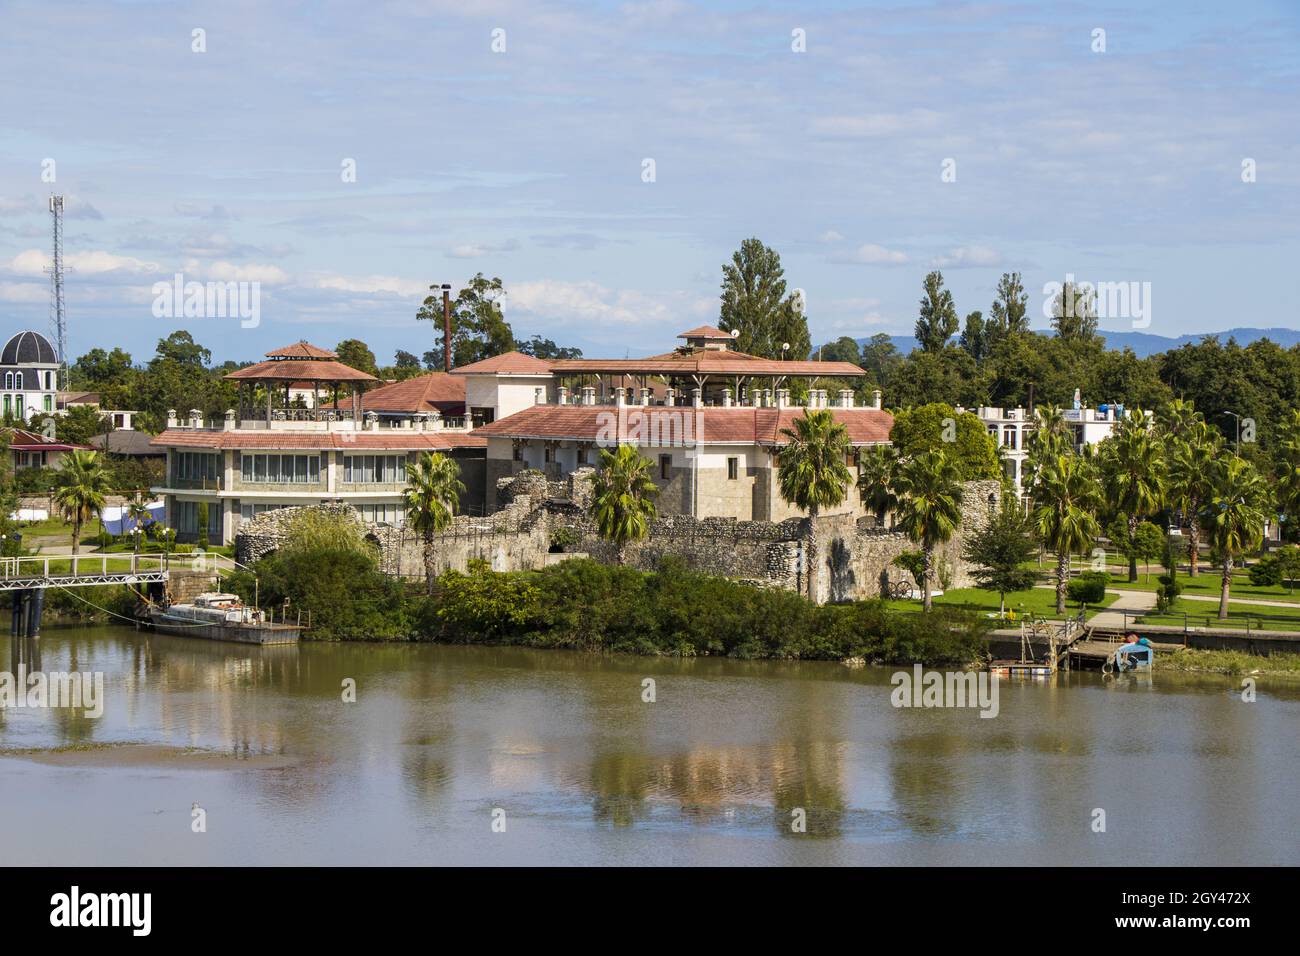 Anaklia resort, hotels and buildings, water and sun Stock Photo